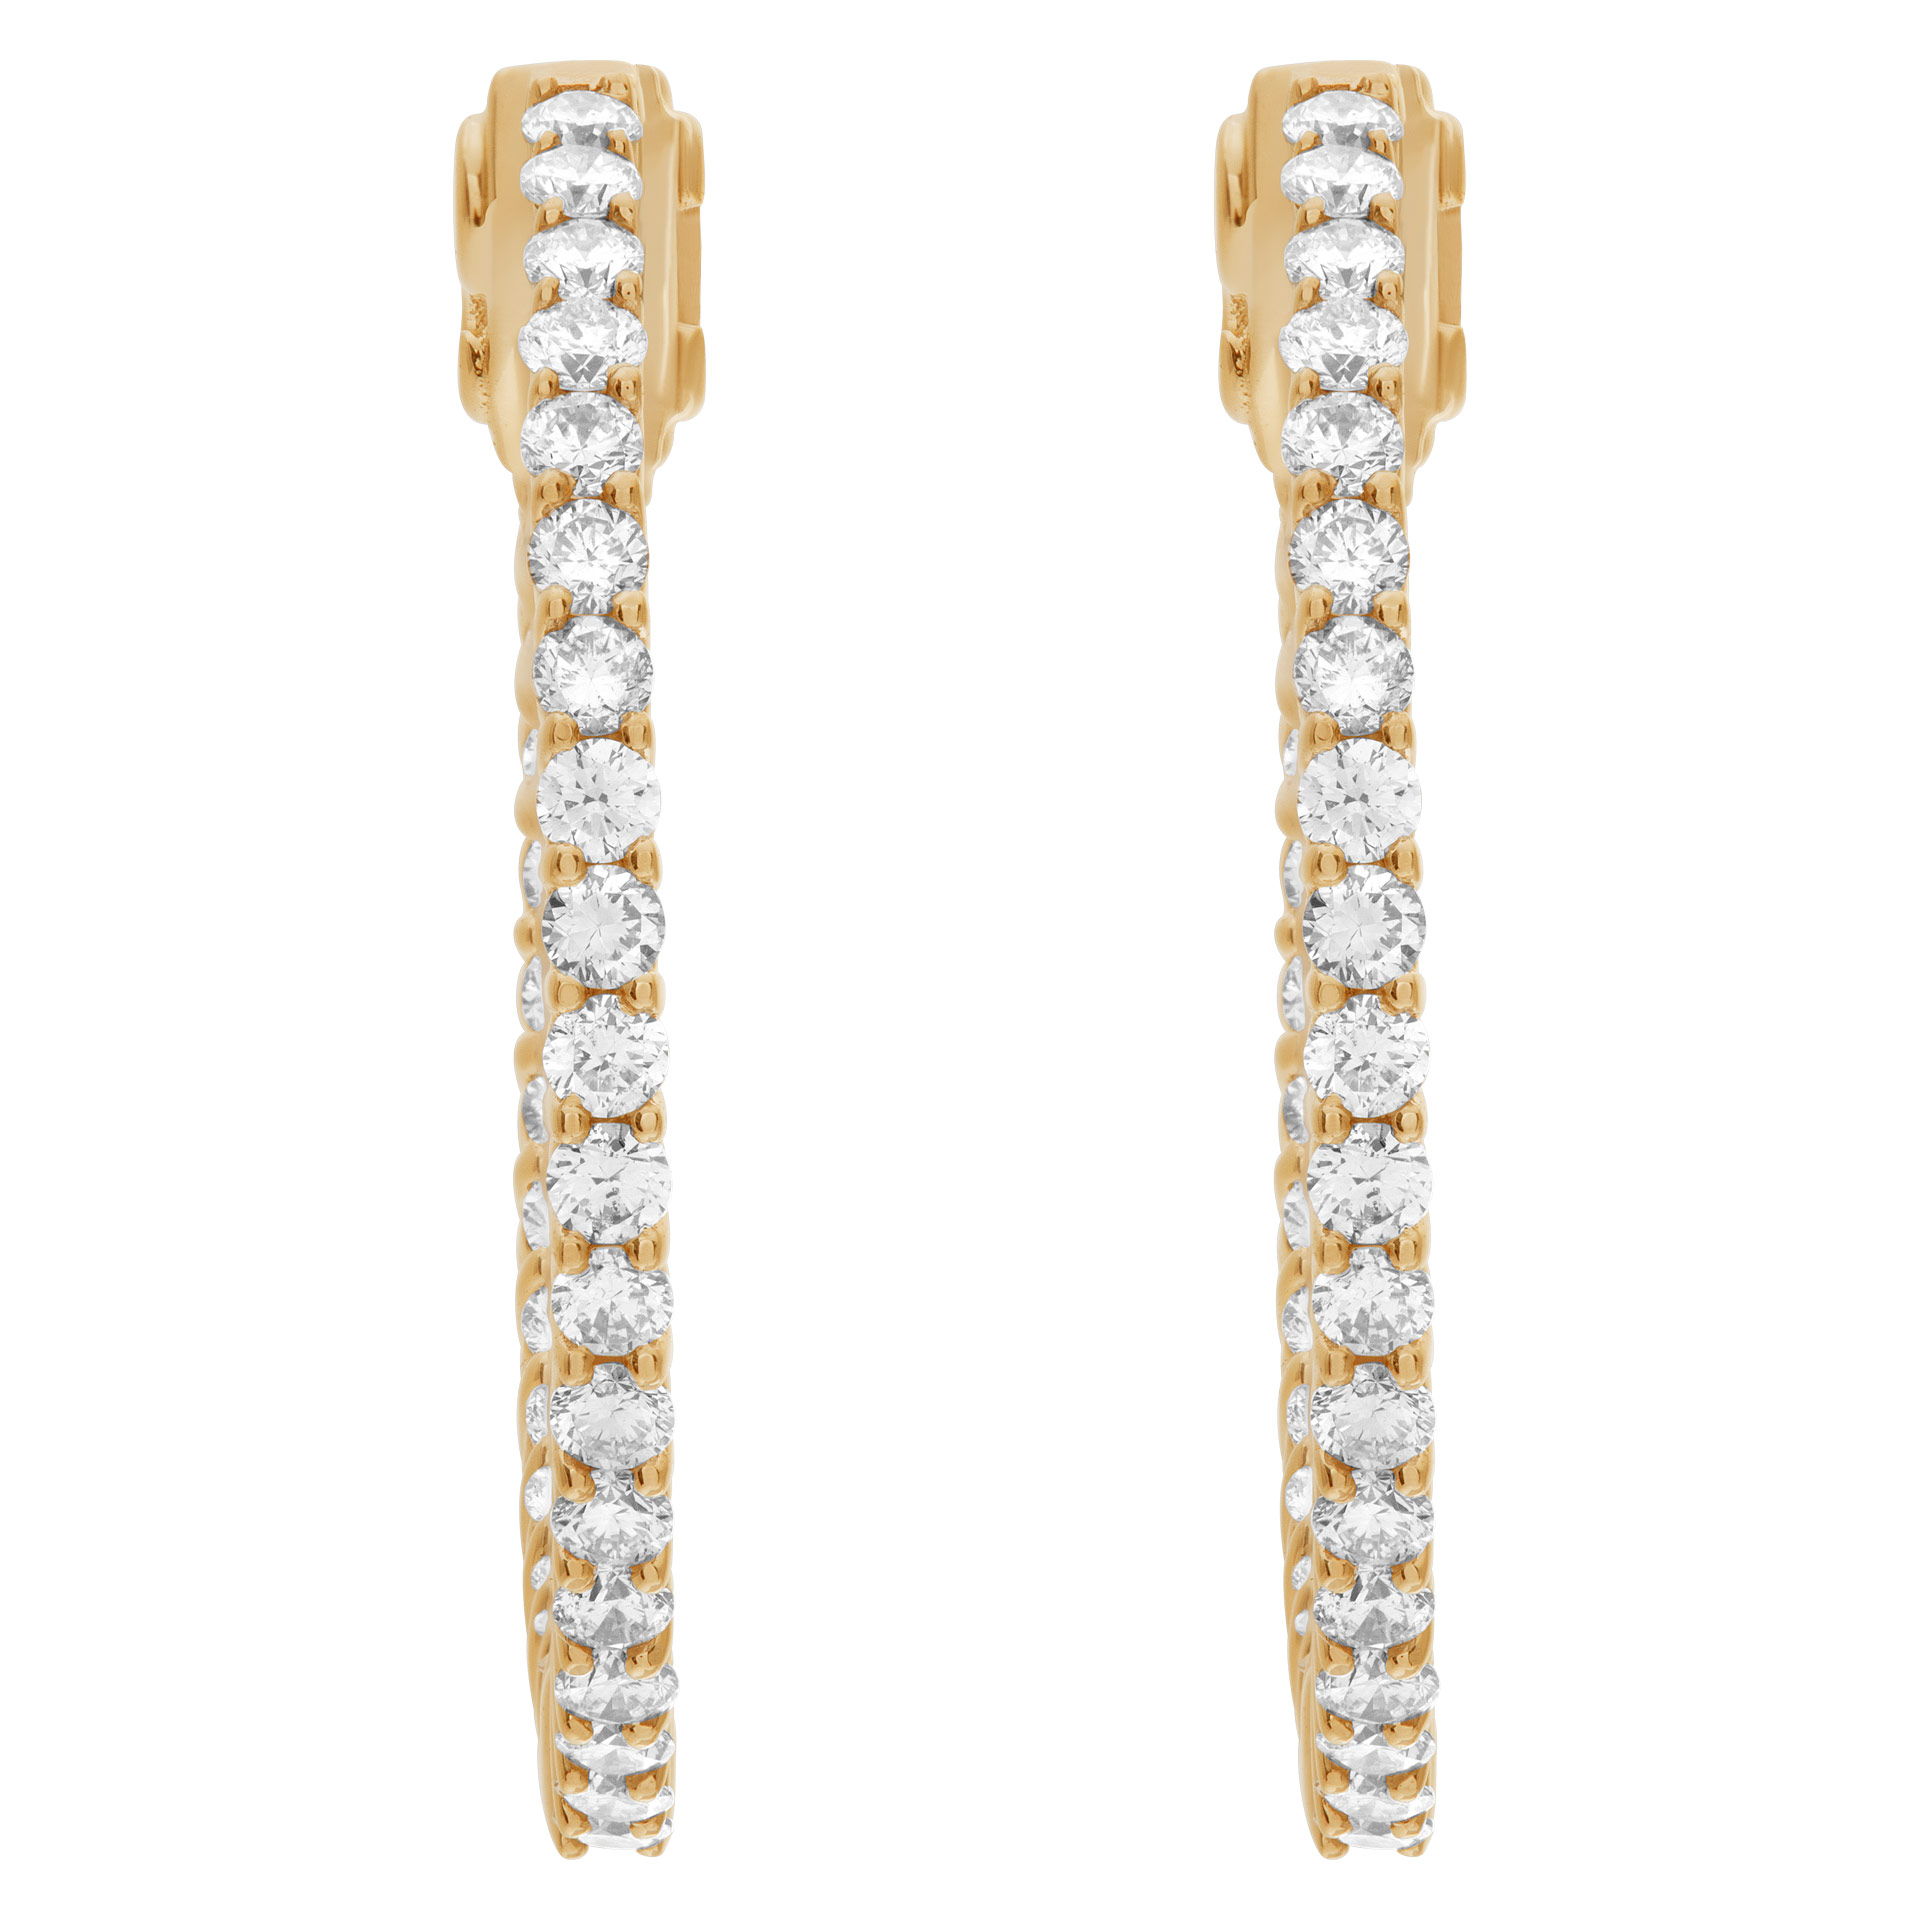 Gorgeous "Inside/out" hoop earrings with 1.66 carats in diamonds in 14k gold image 1